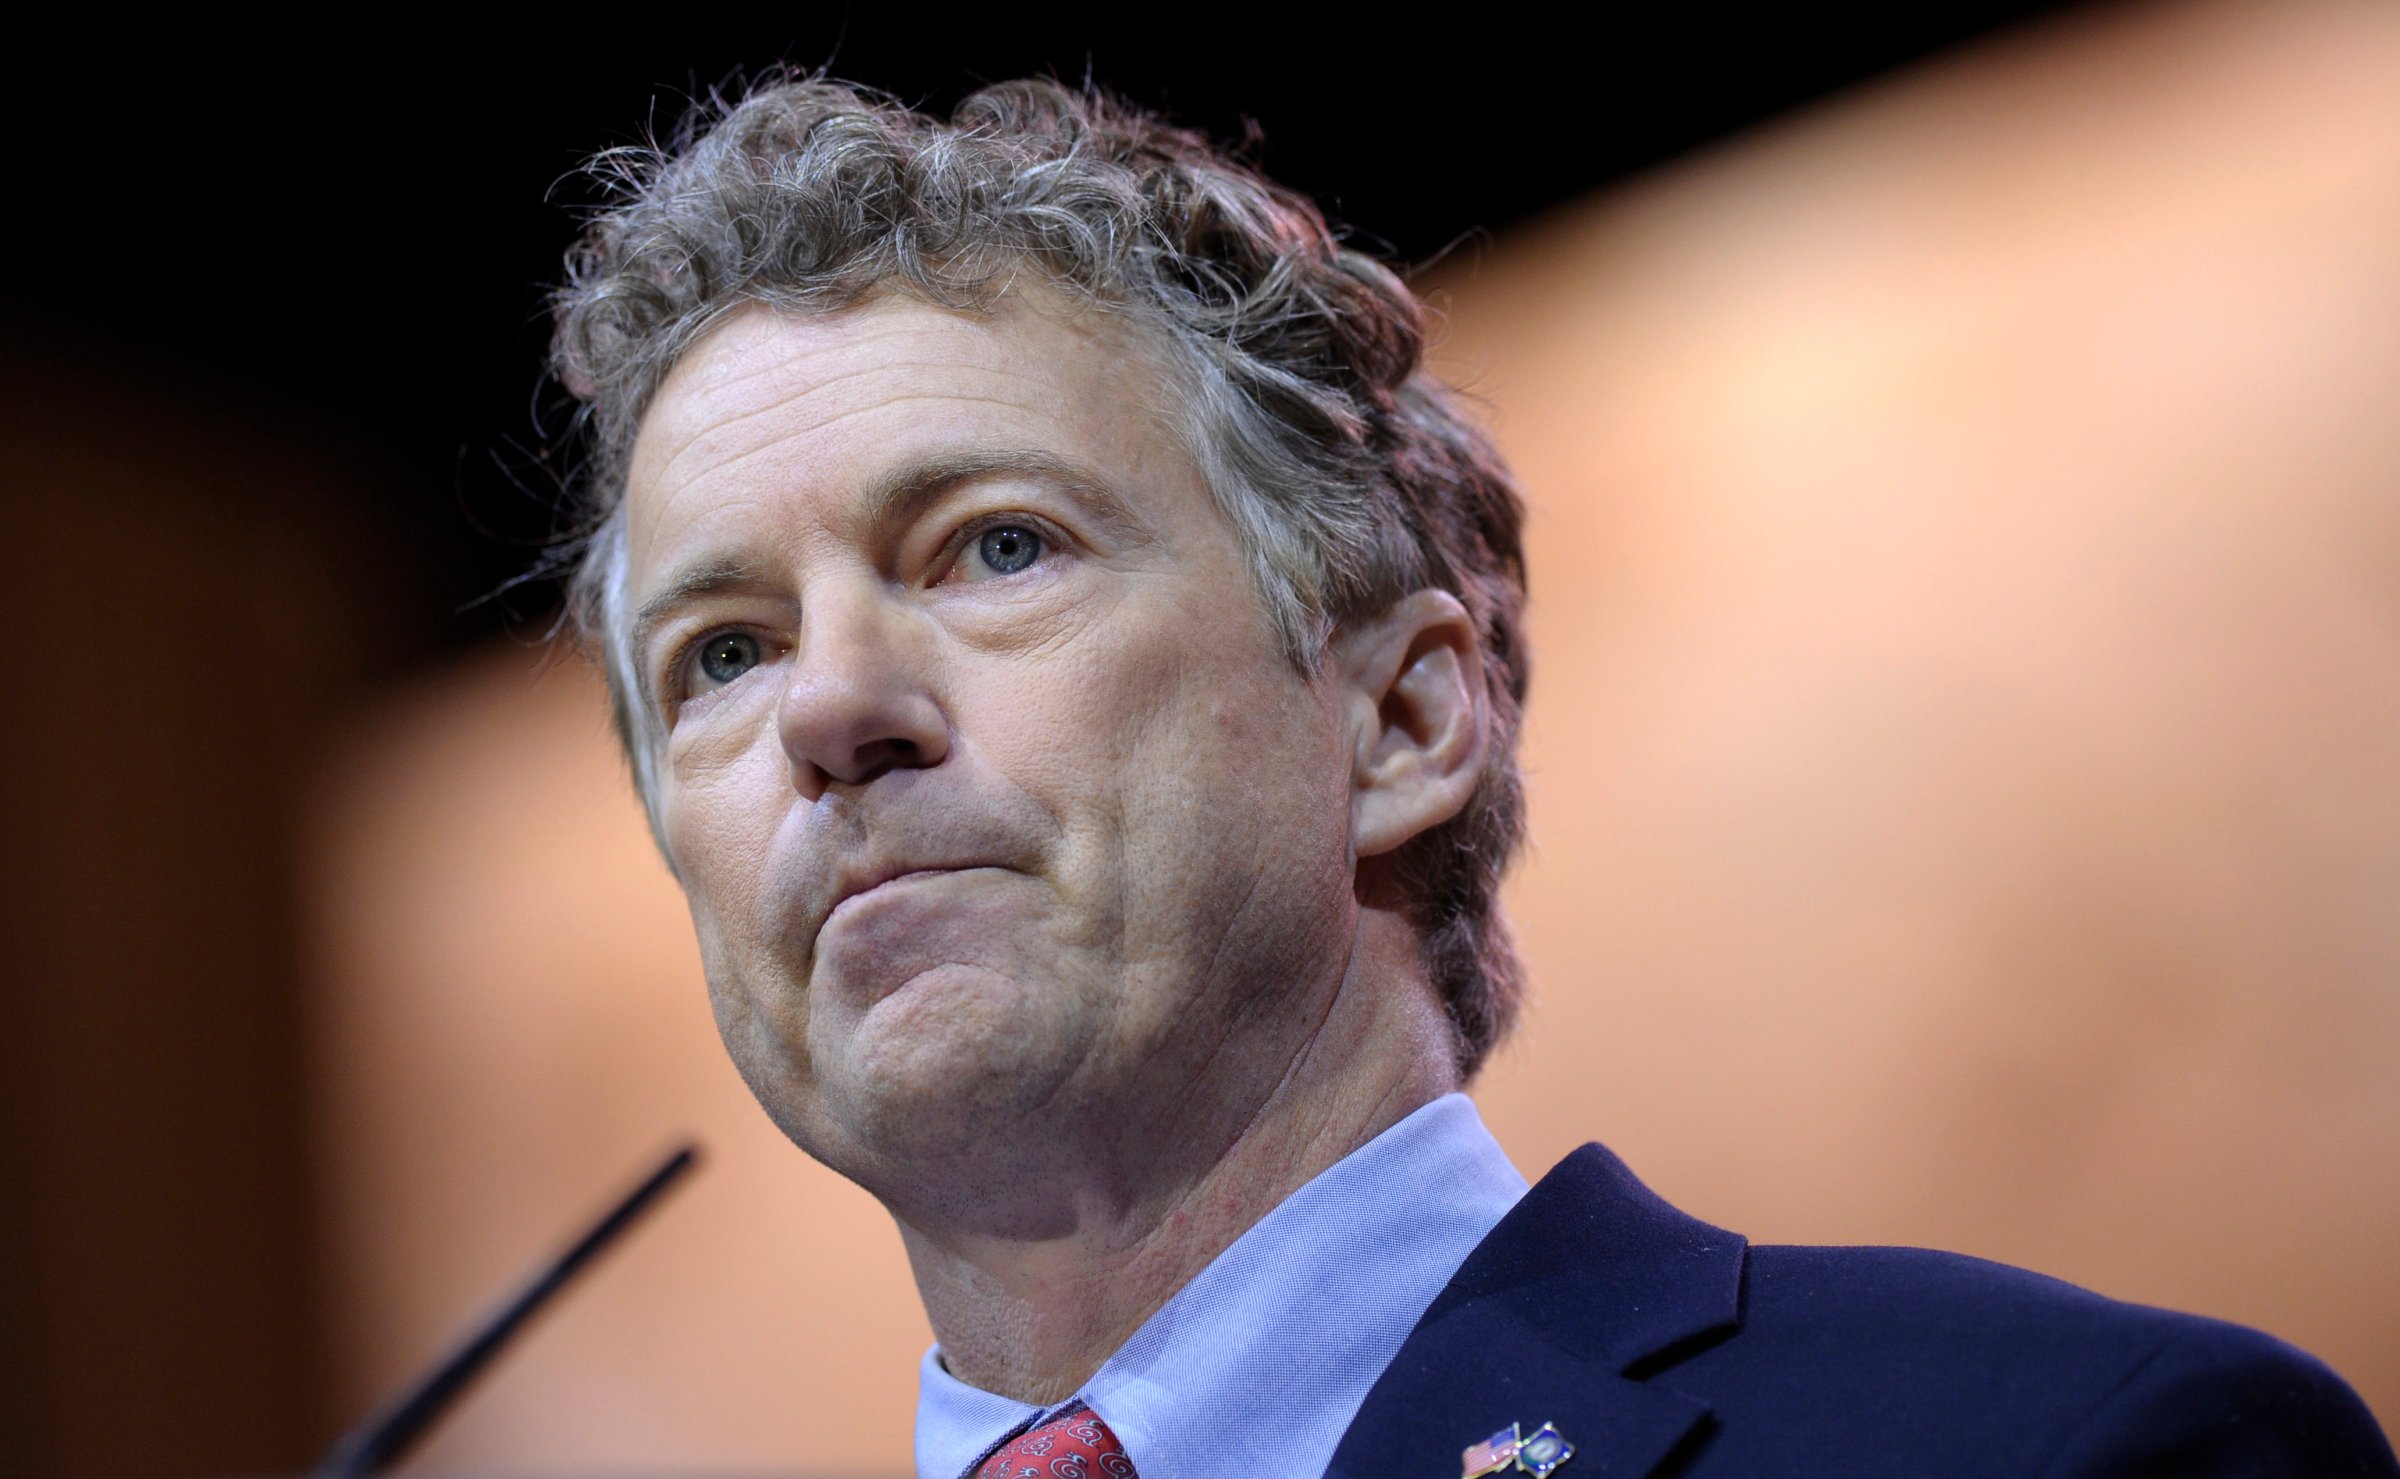 Senator Rand Paul speaks at the Conservative Political Action Committee annual conference in National Harbor, Md., on March 7, 2014.